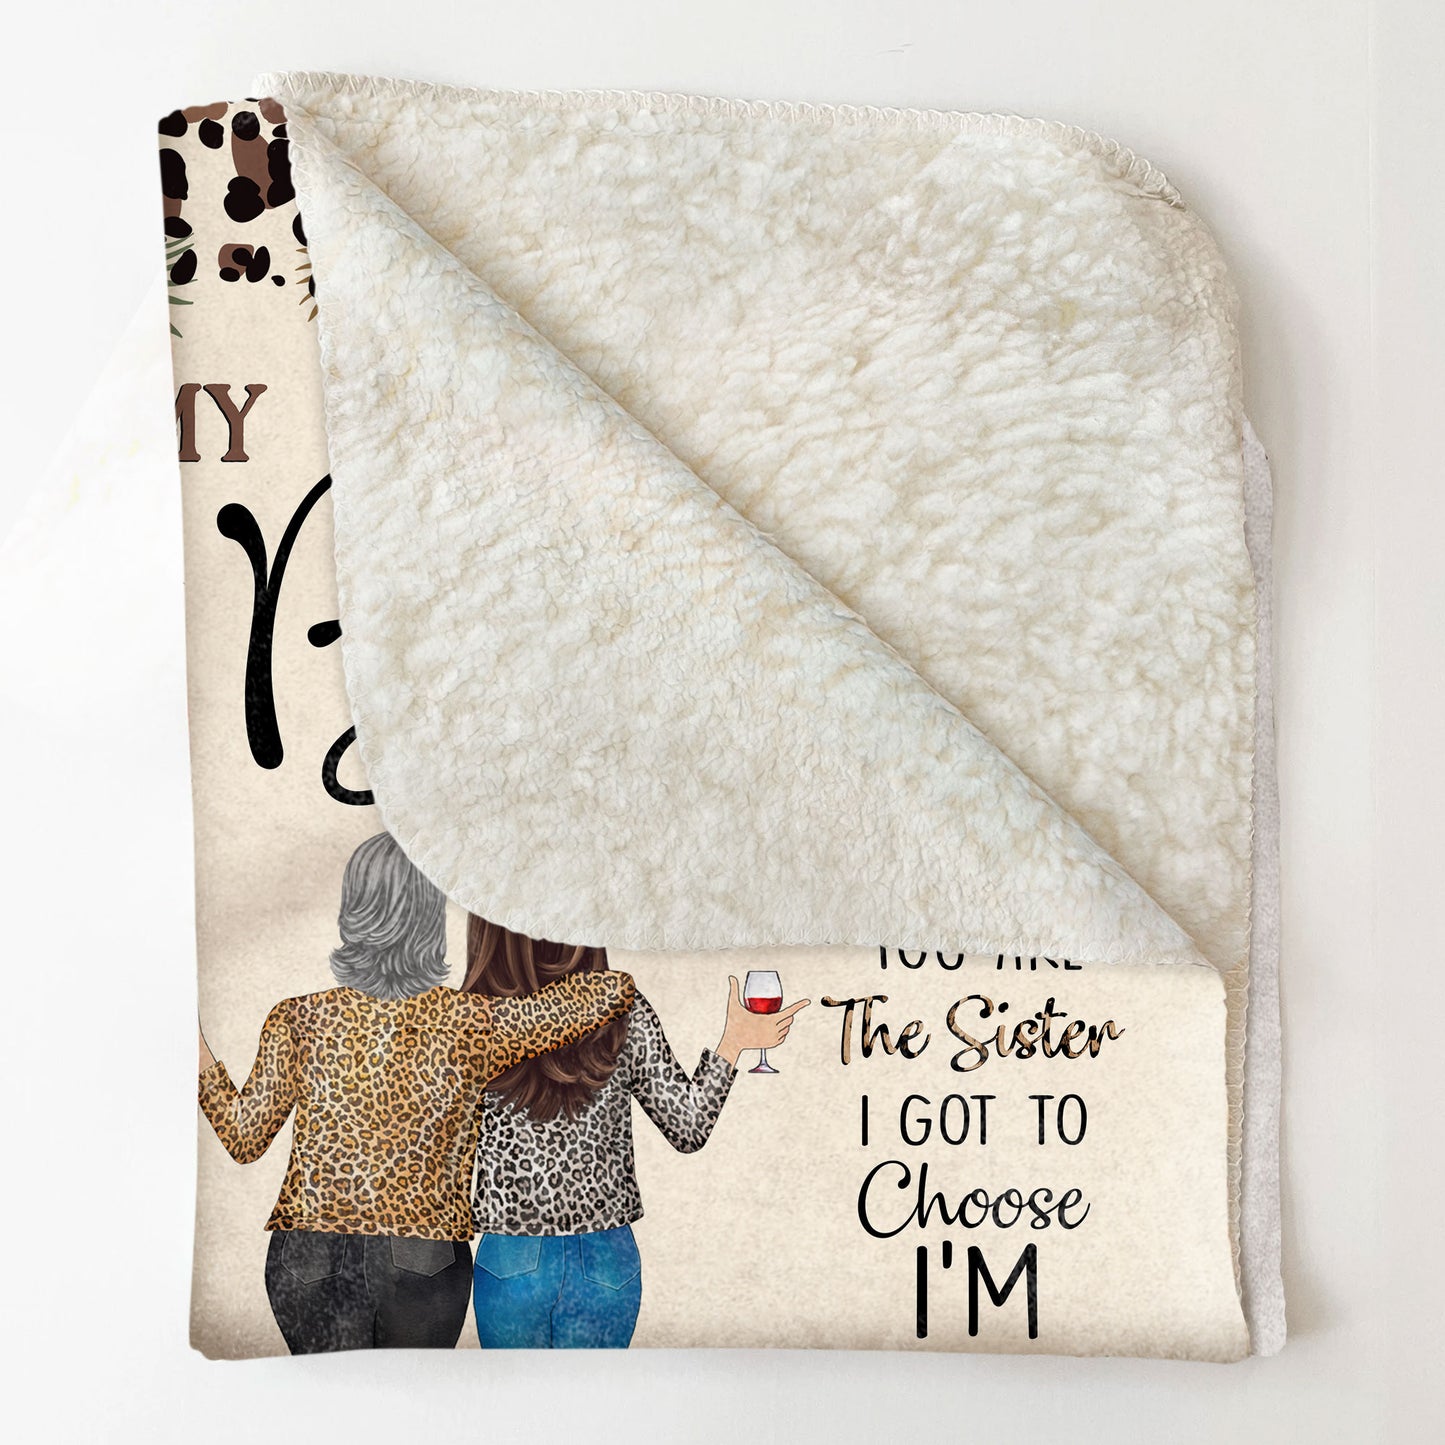 Thank You For Standing By My Side Friendship - Personalized Blanket